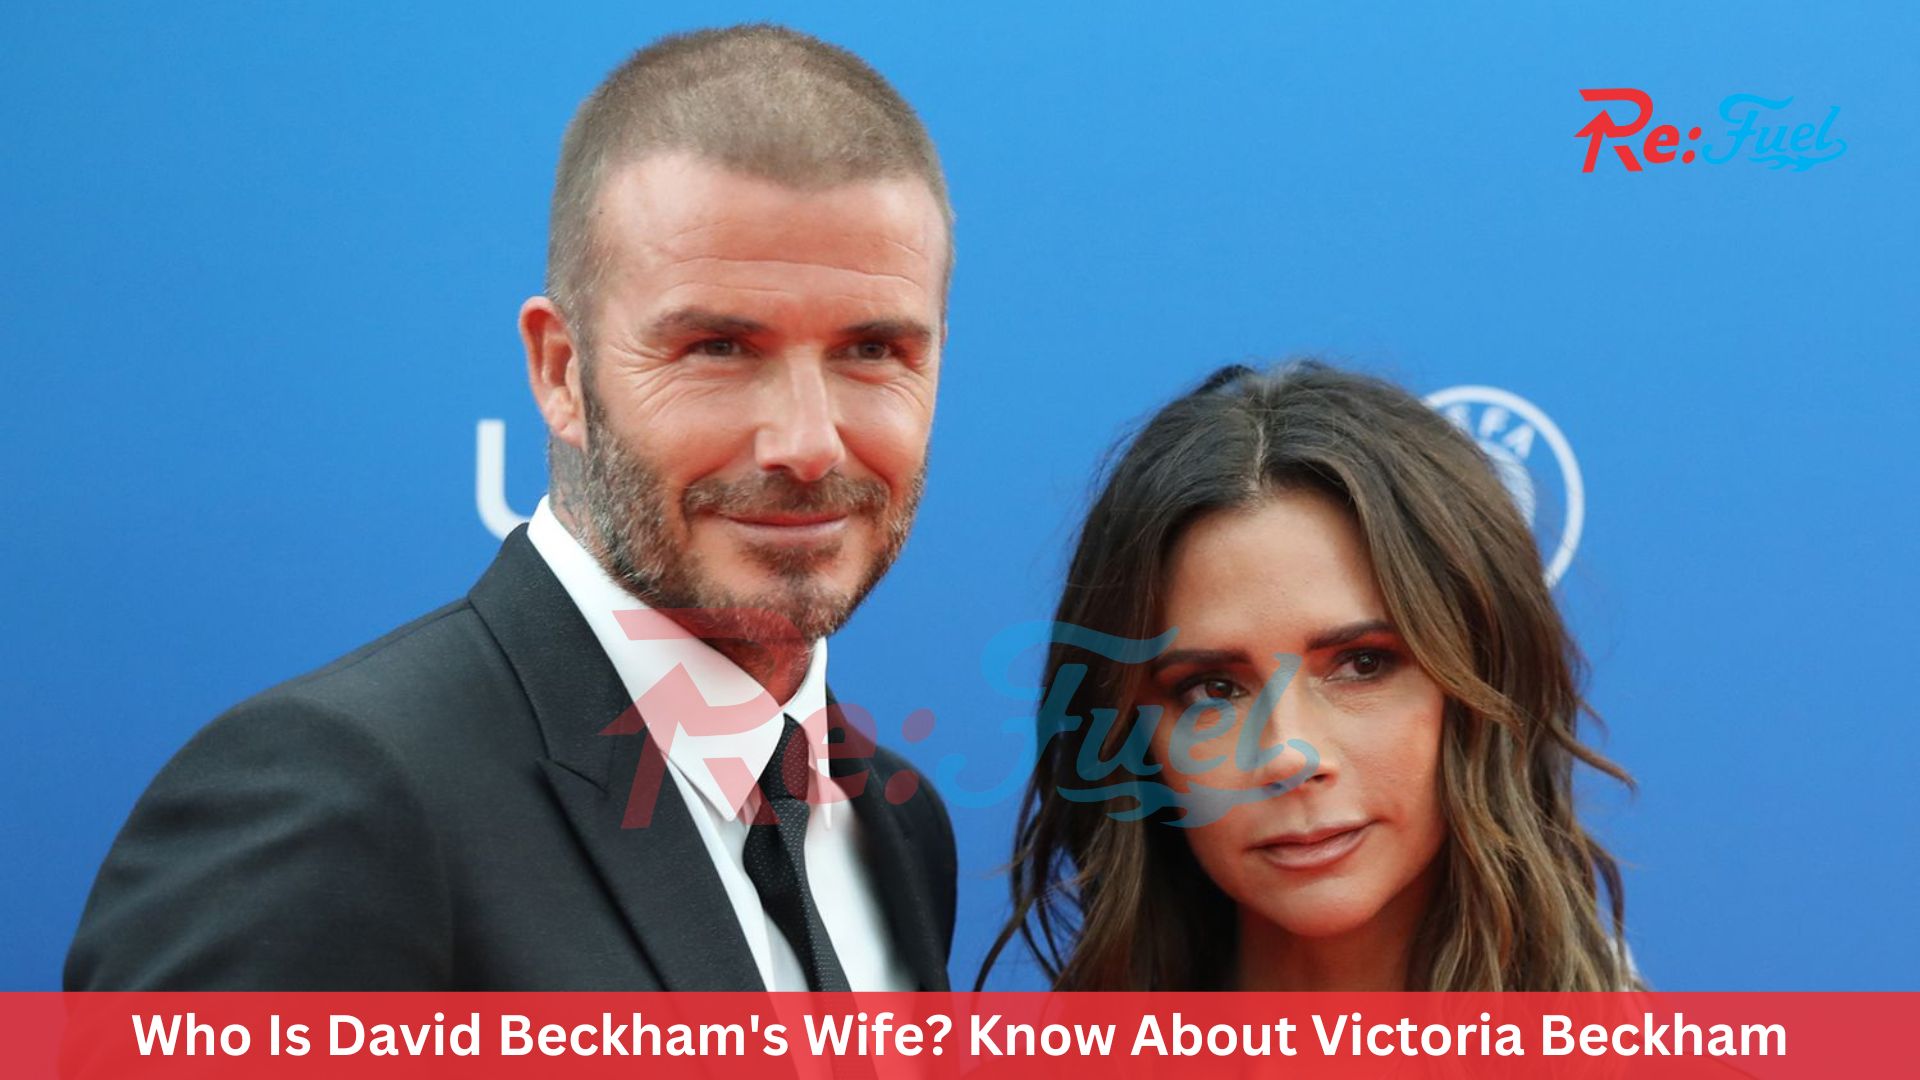 Who Is David Beckham's Wife? Know About Victoria Beckham